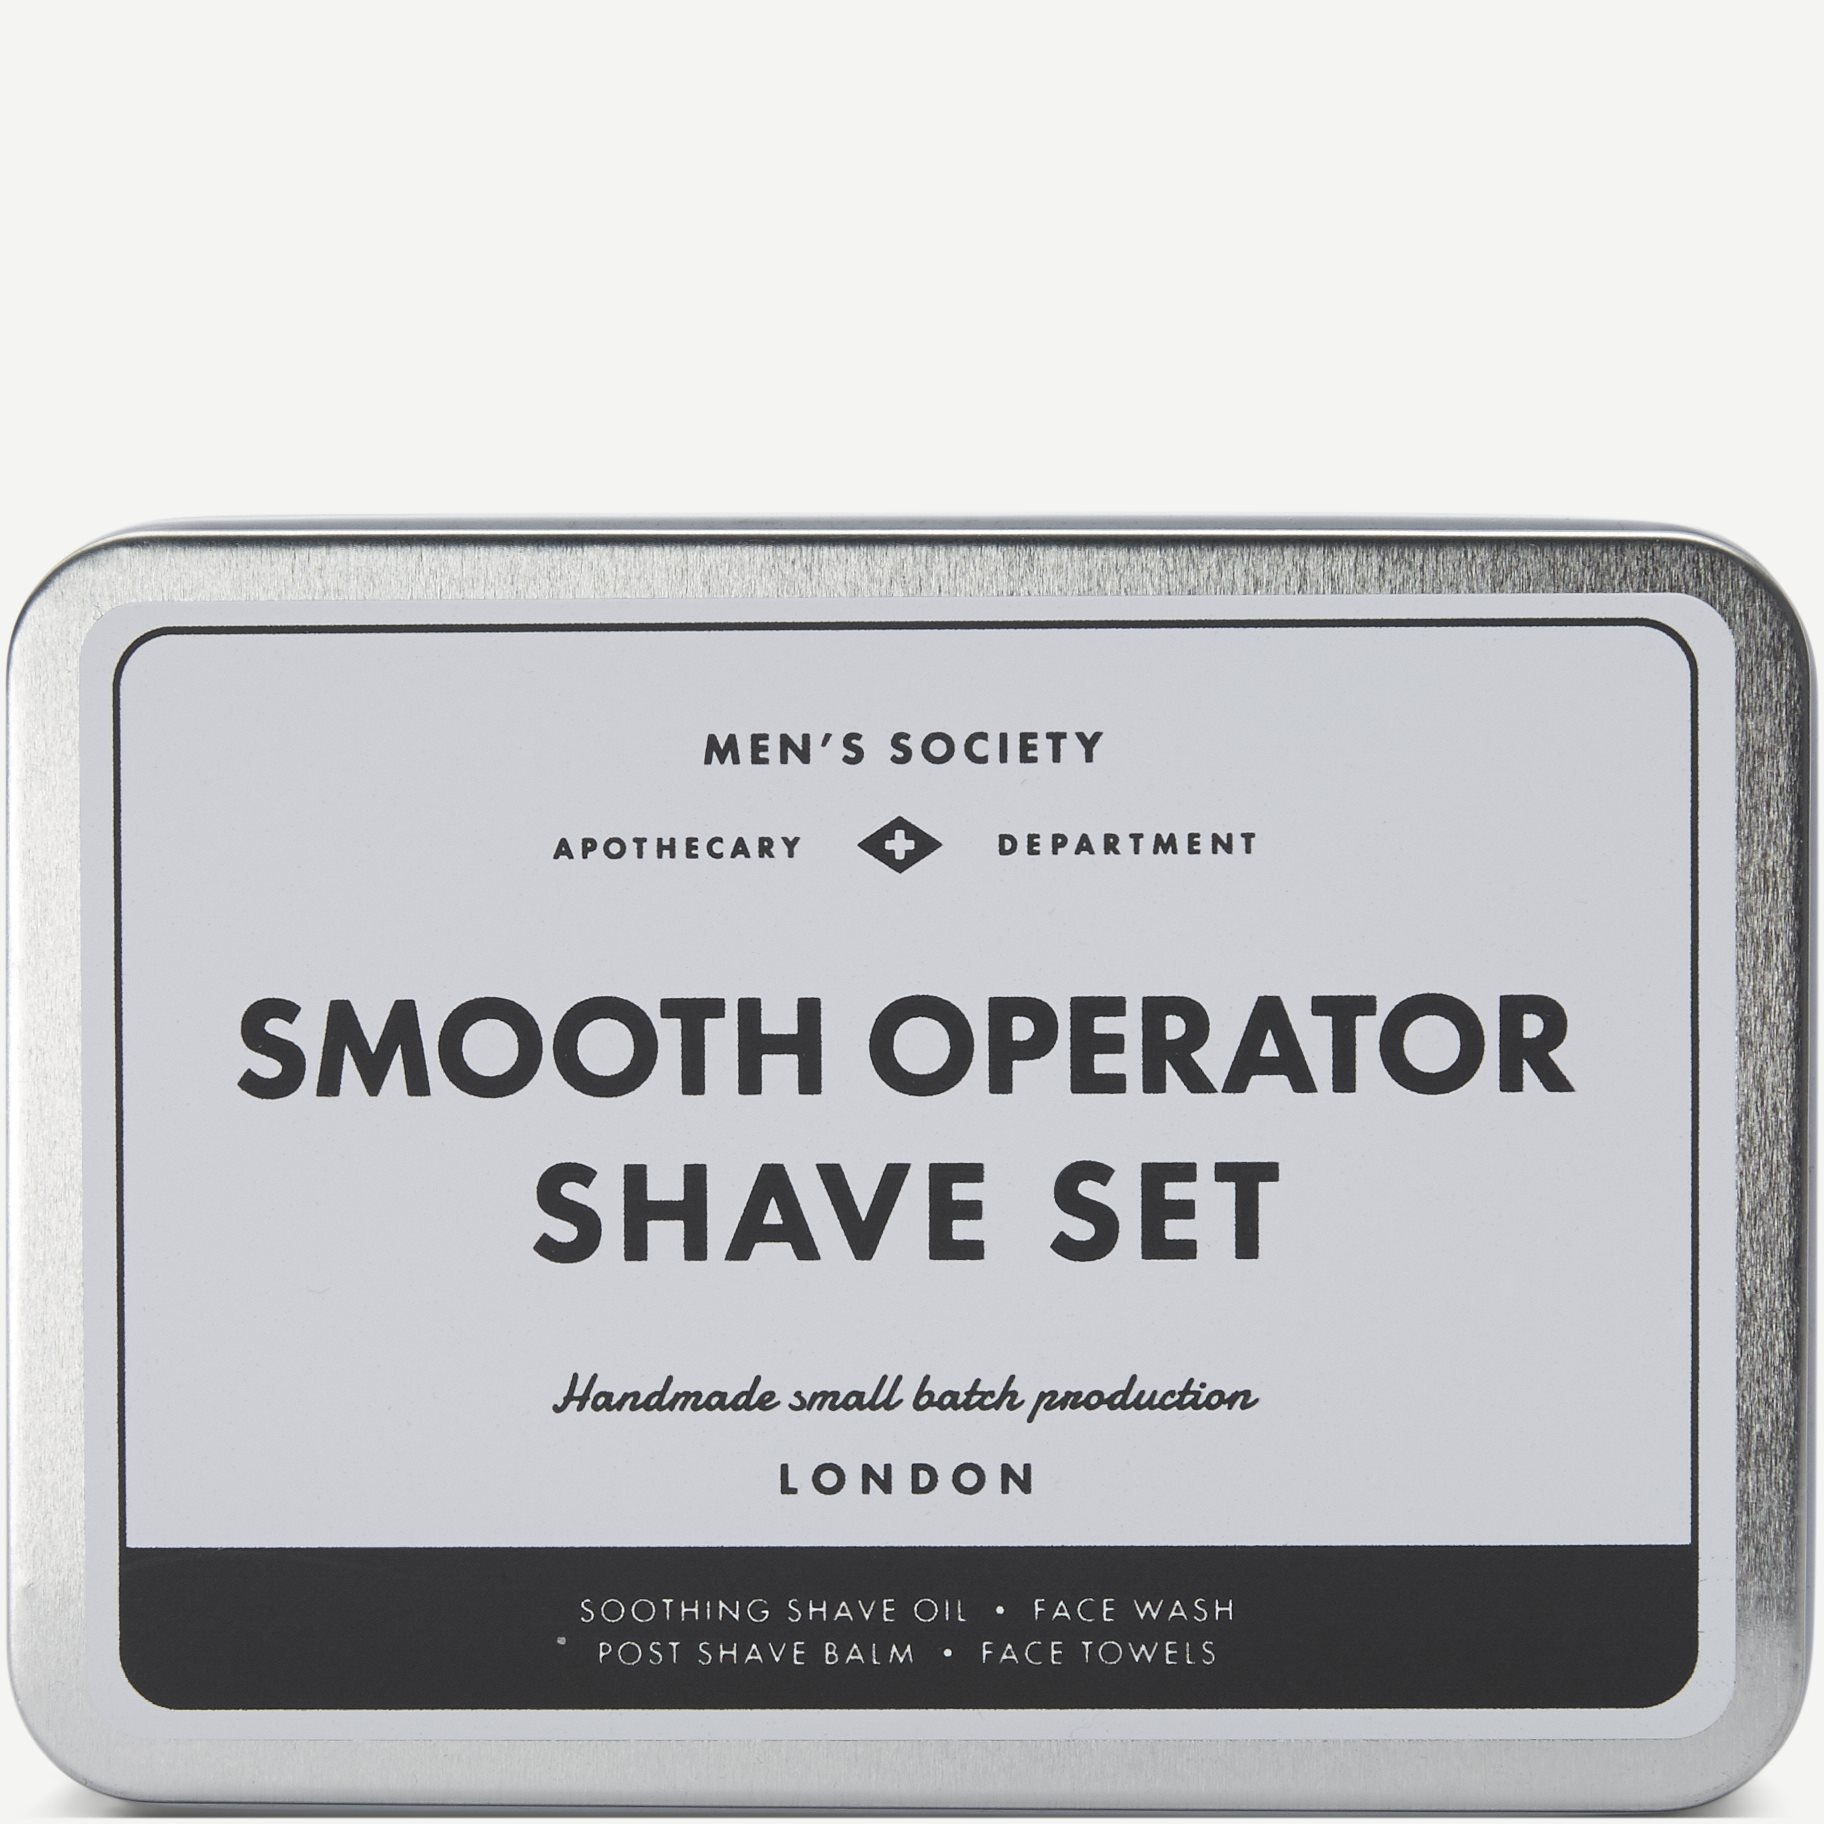 Men's Society Accessories SMOOTH OPERATOR SHAVE KIT Grey